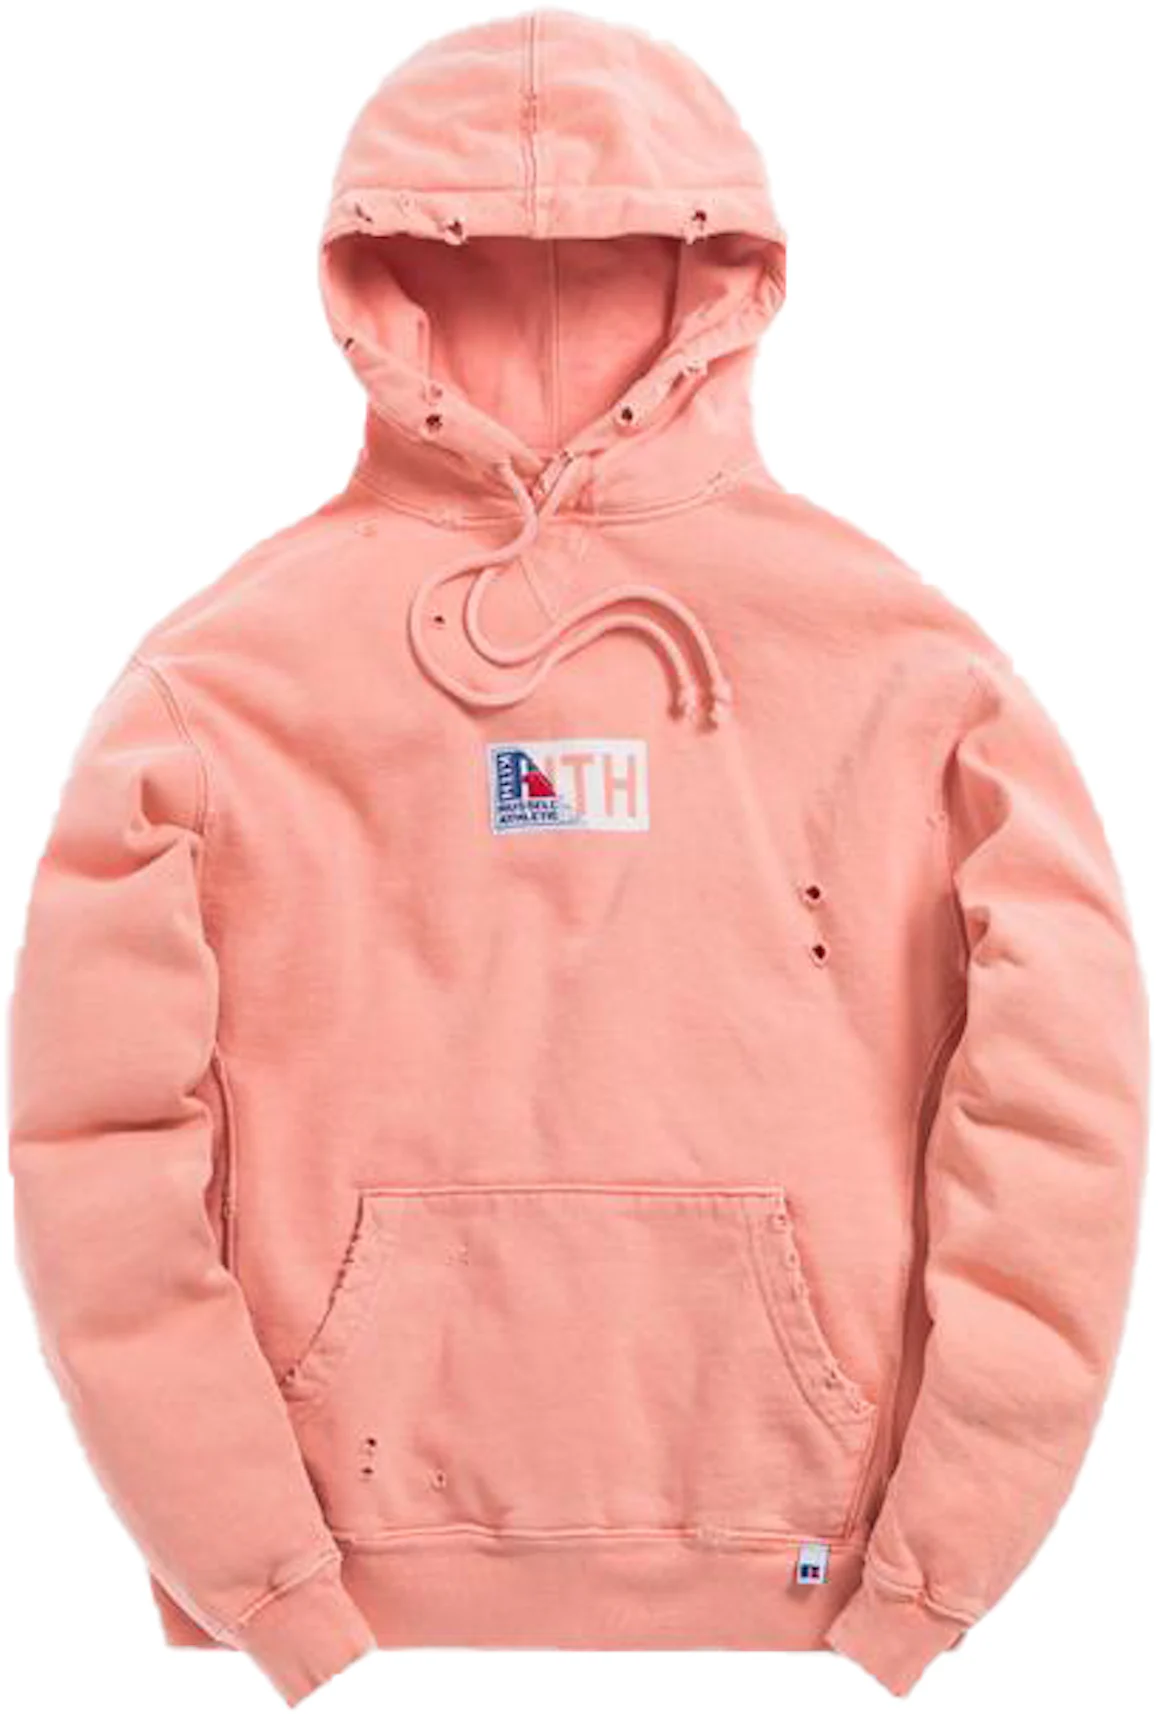 https://images.stockx.com/images/Kith-x-Russell-Athletic-Vintage-Hoodie-Blossom.png?fit=fill&bg=FFFFFF&w=1200&h=857&fm=webp&auto=compress&dpr=2&trim=color&updated_at=1623265520&q=60